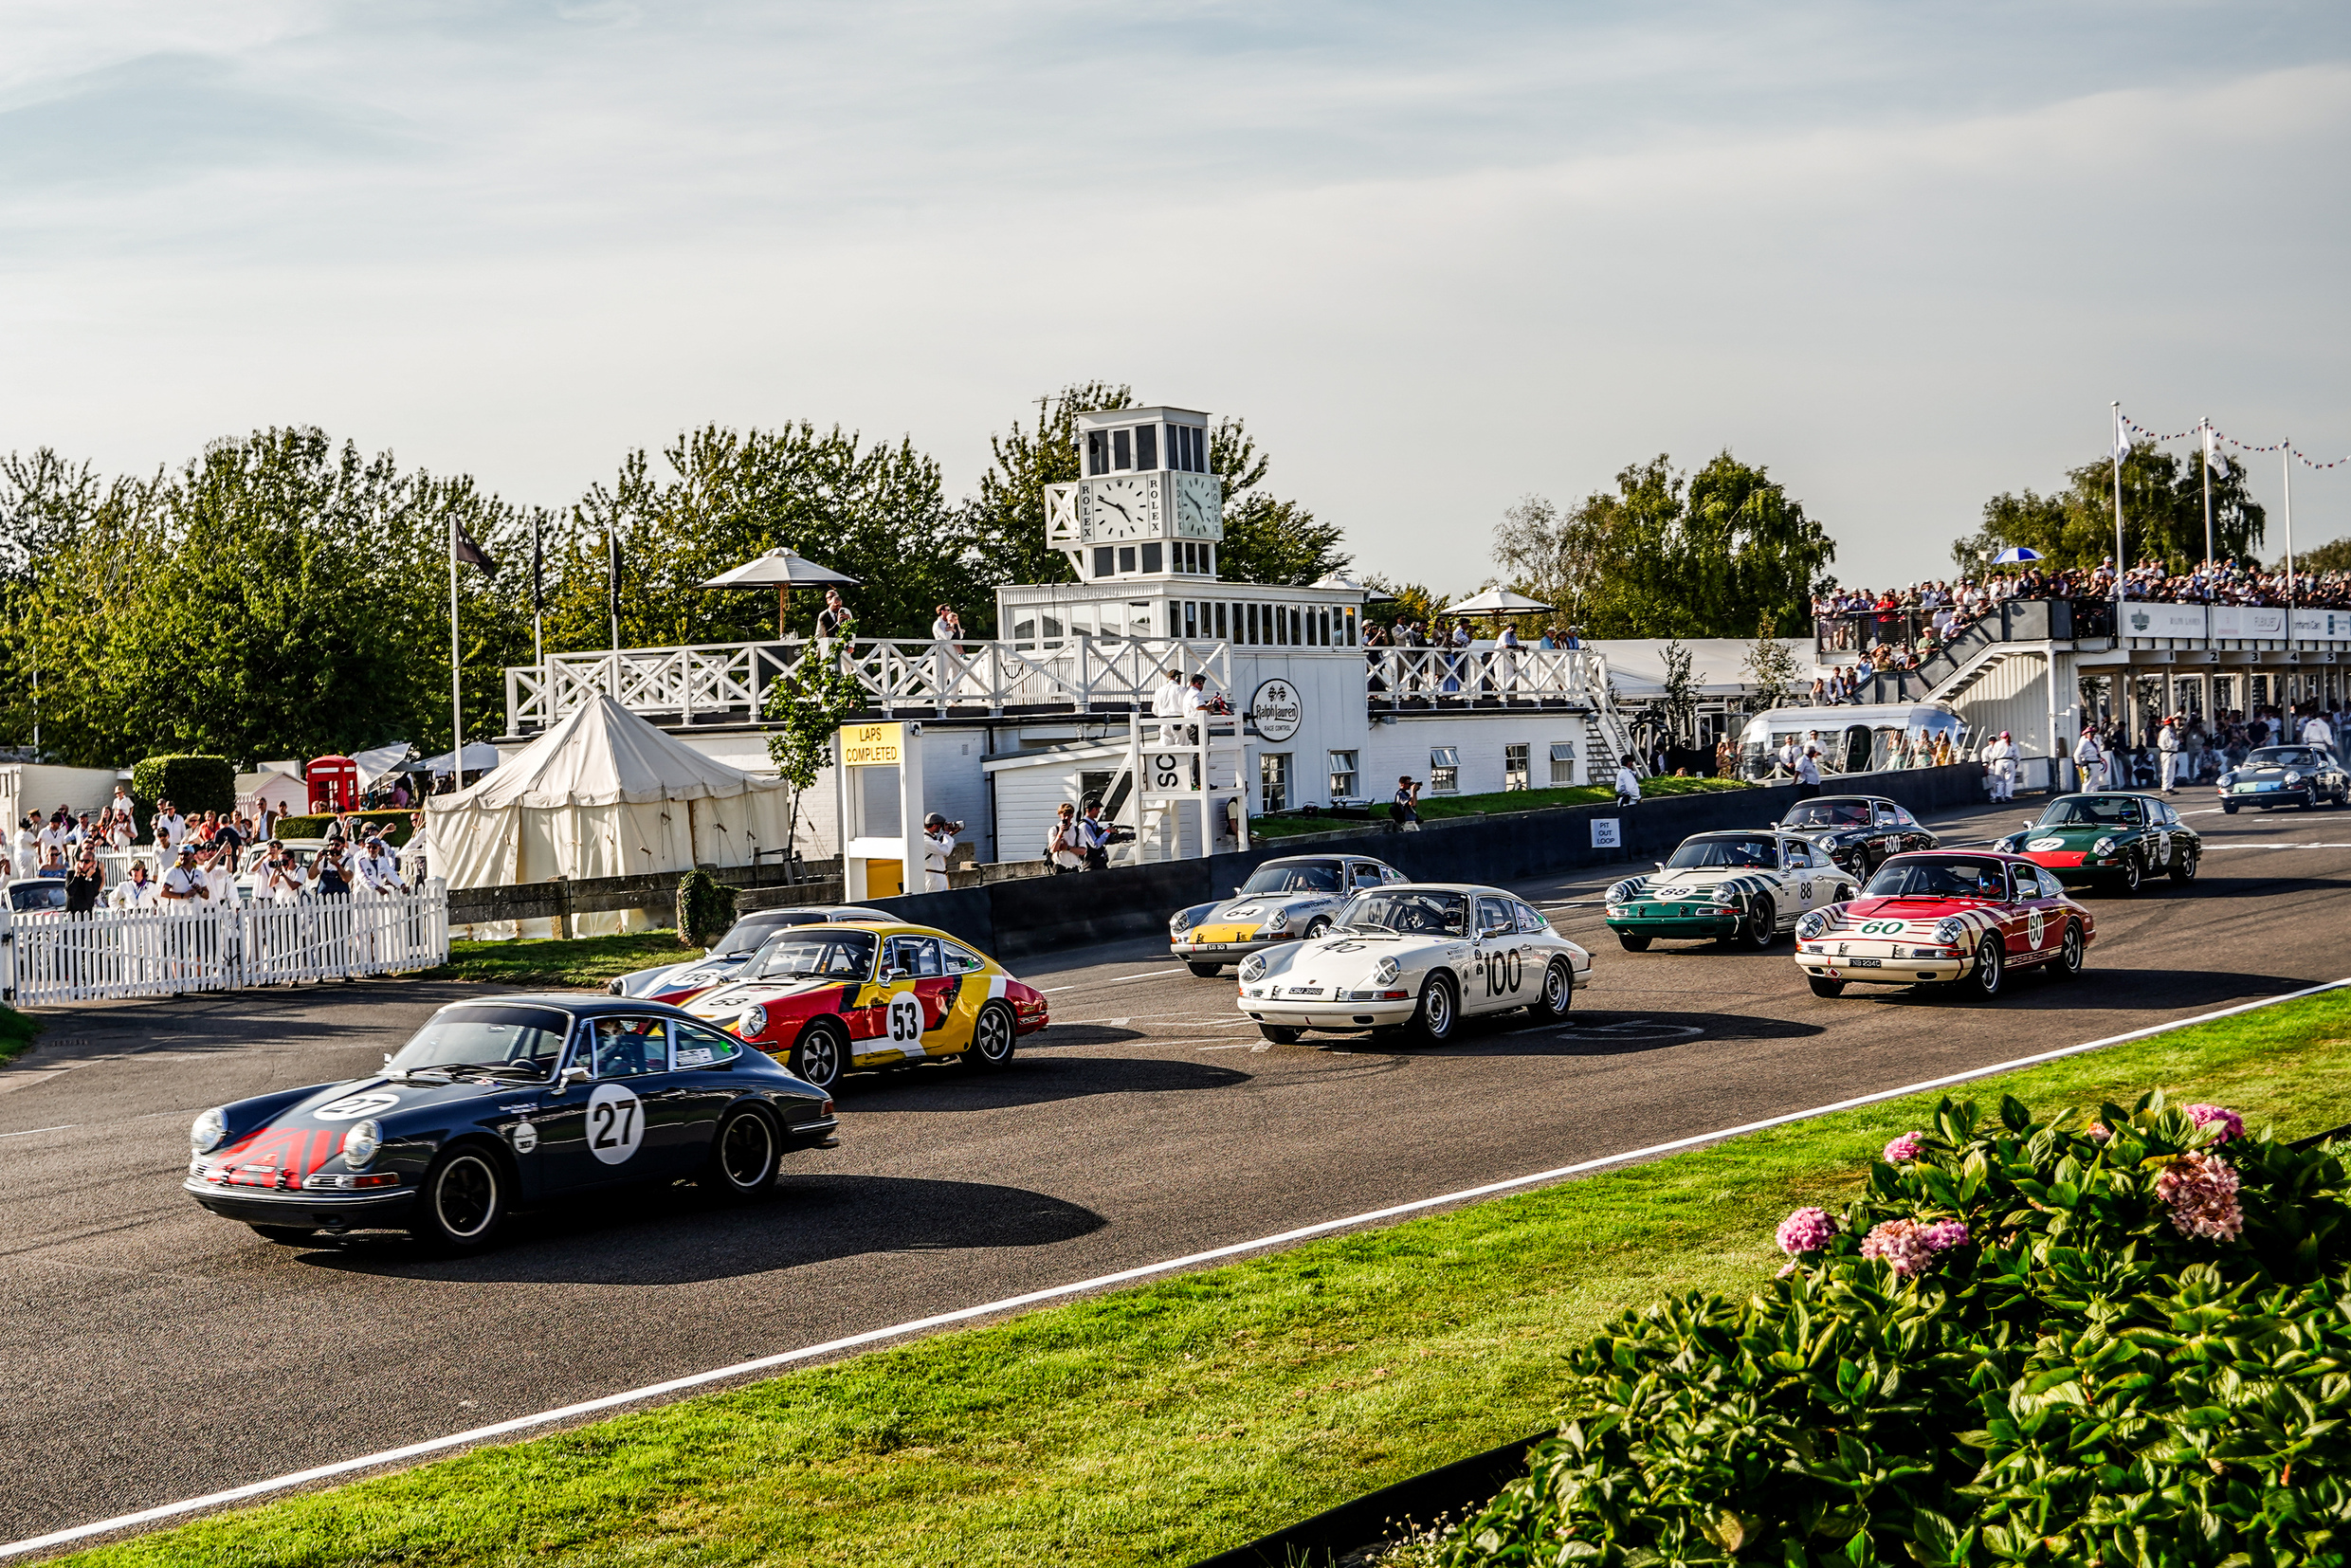 The Goodwood Revival will be powered by sustainable fuel